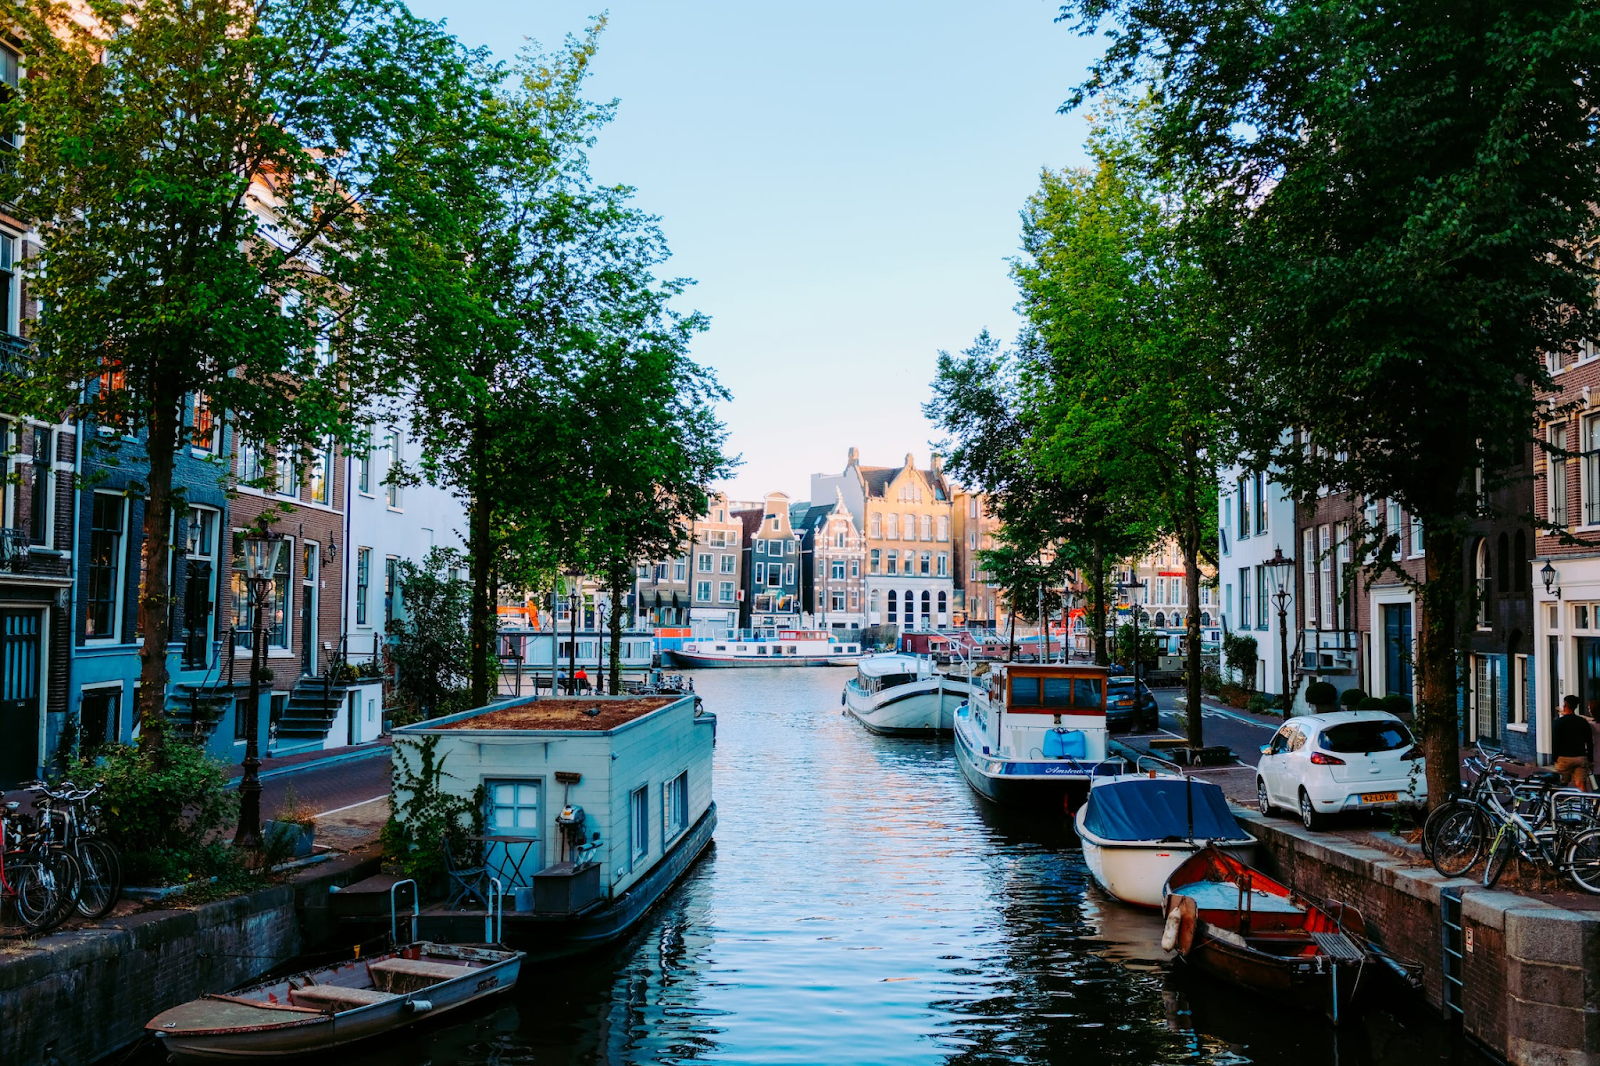 Enjoy a scenic cruise through Amsterdam’s mythical canals in the evening, you won’t regret this! 